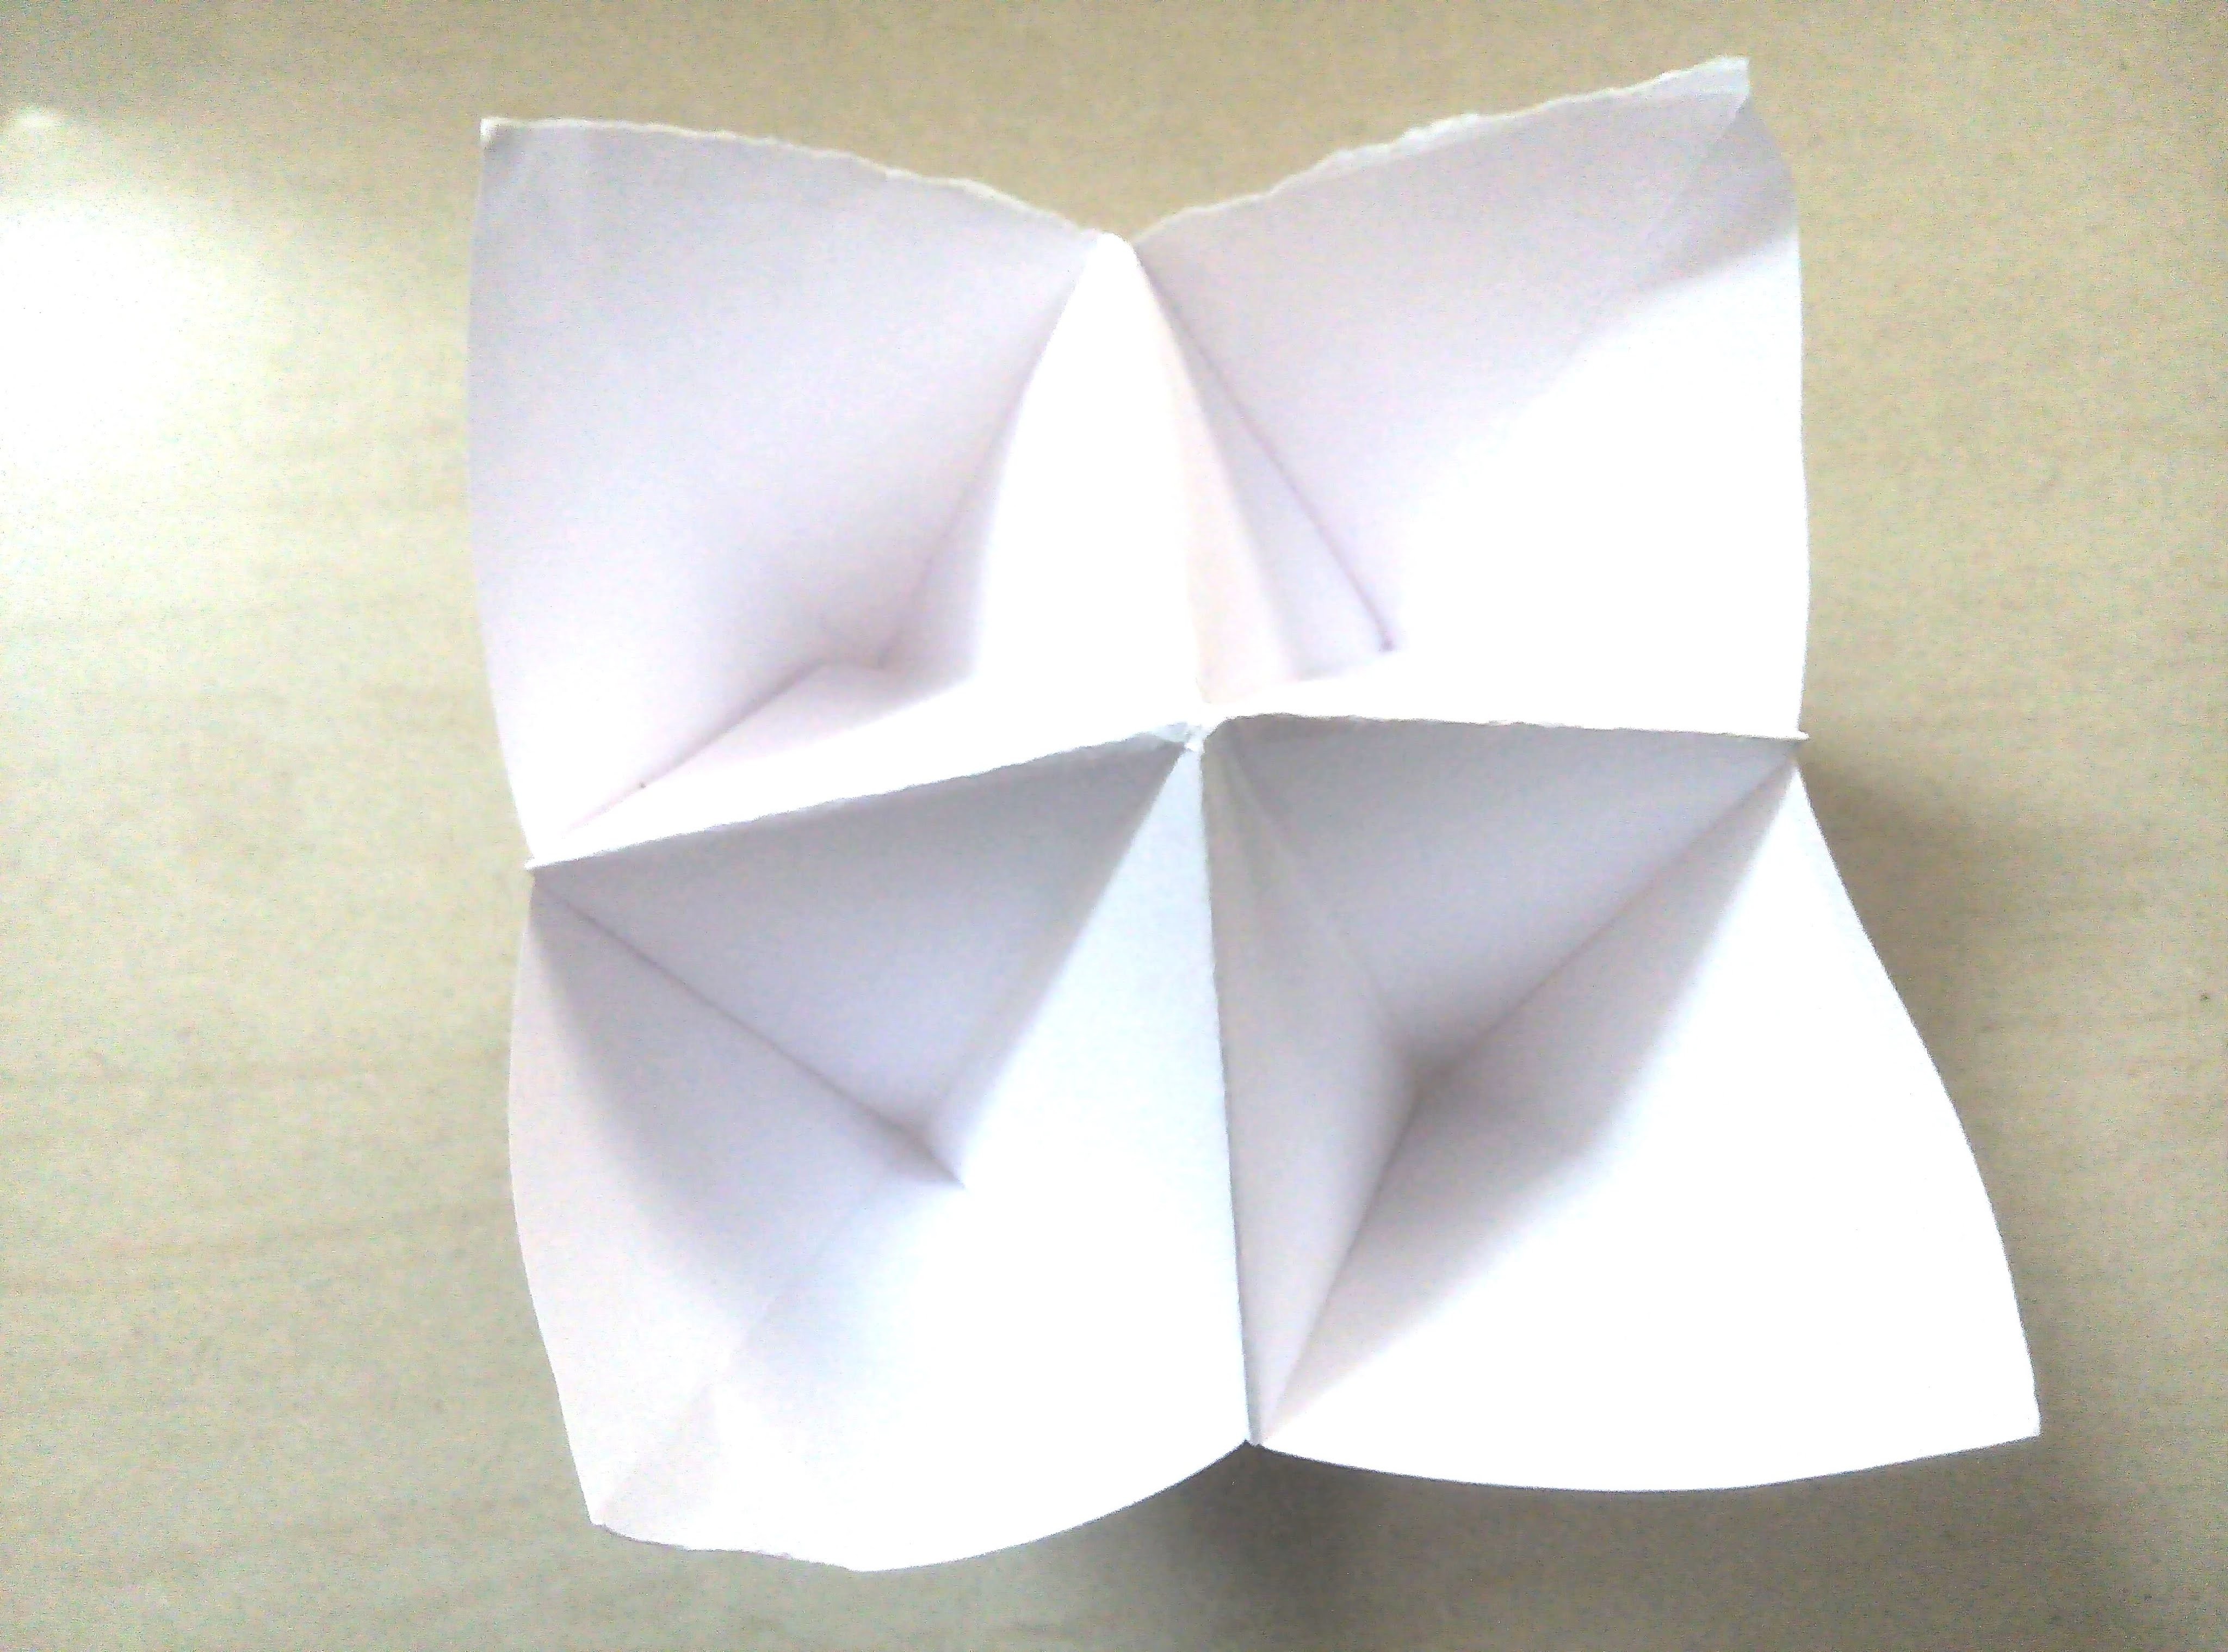 Канал 4 бумага. Оригами кофе. How to make paper. DIY - how to make an Origami ship from a4 paper. Paper Toys making.